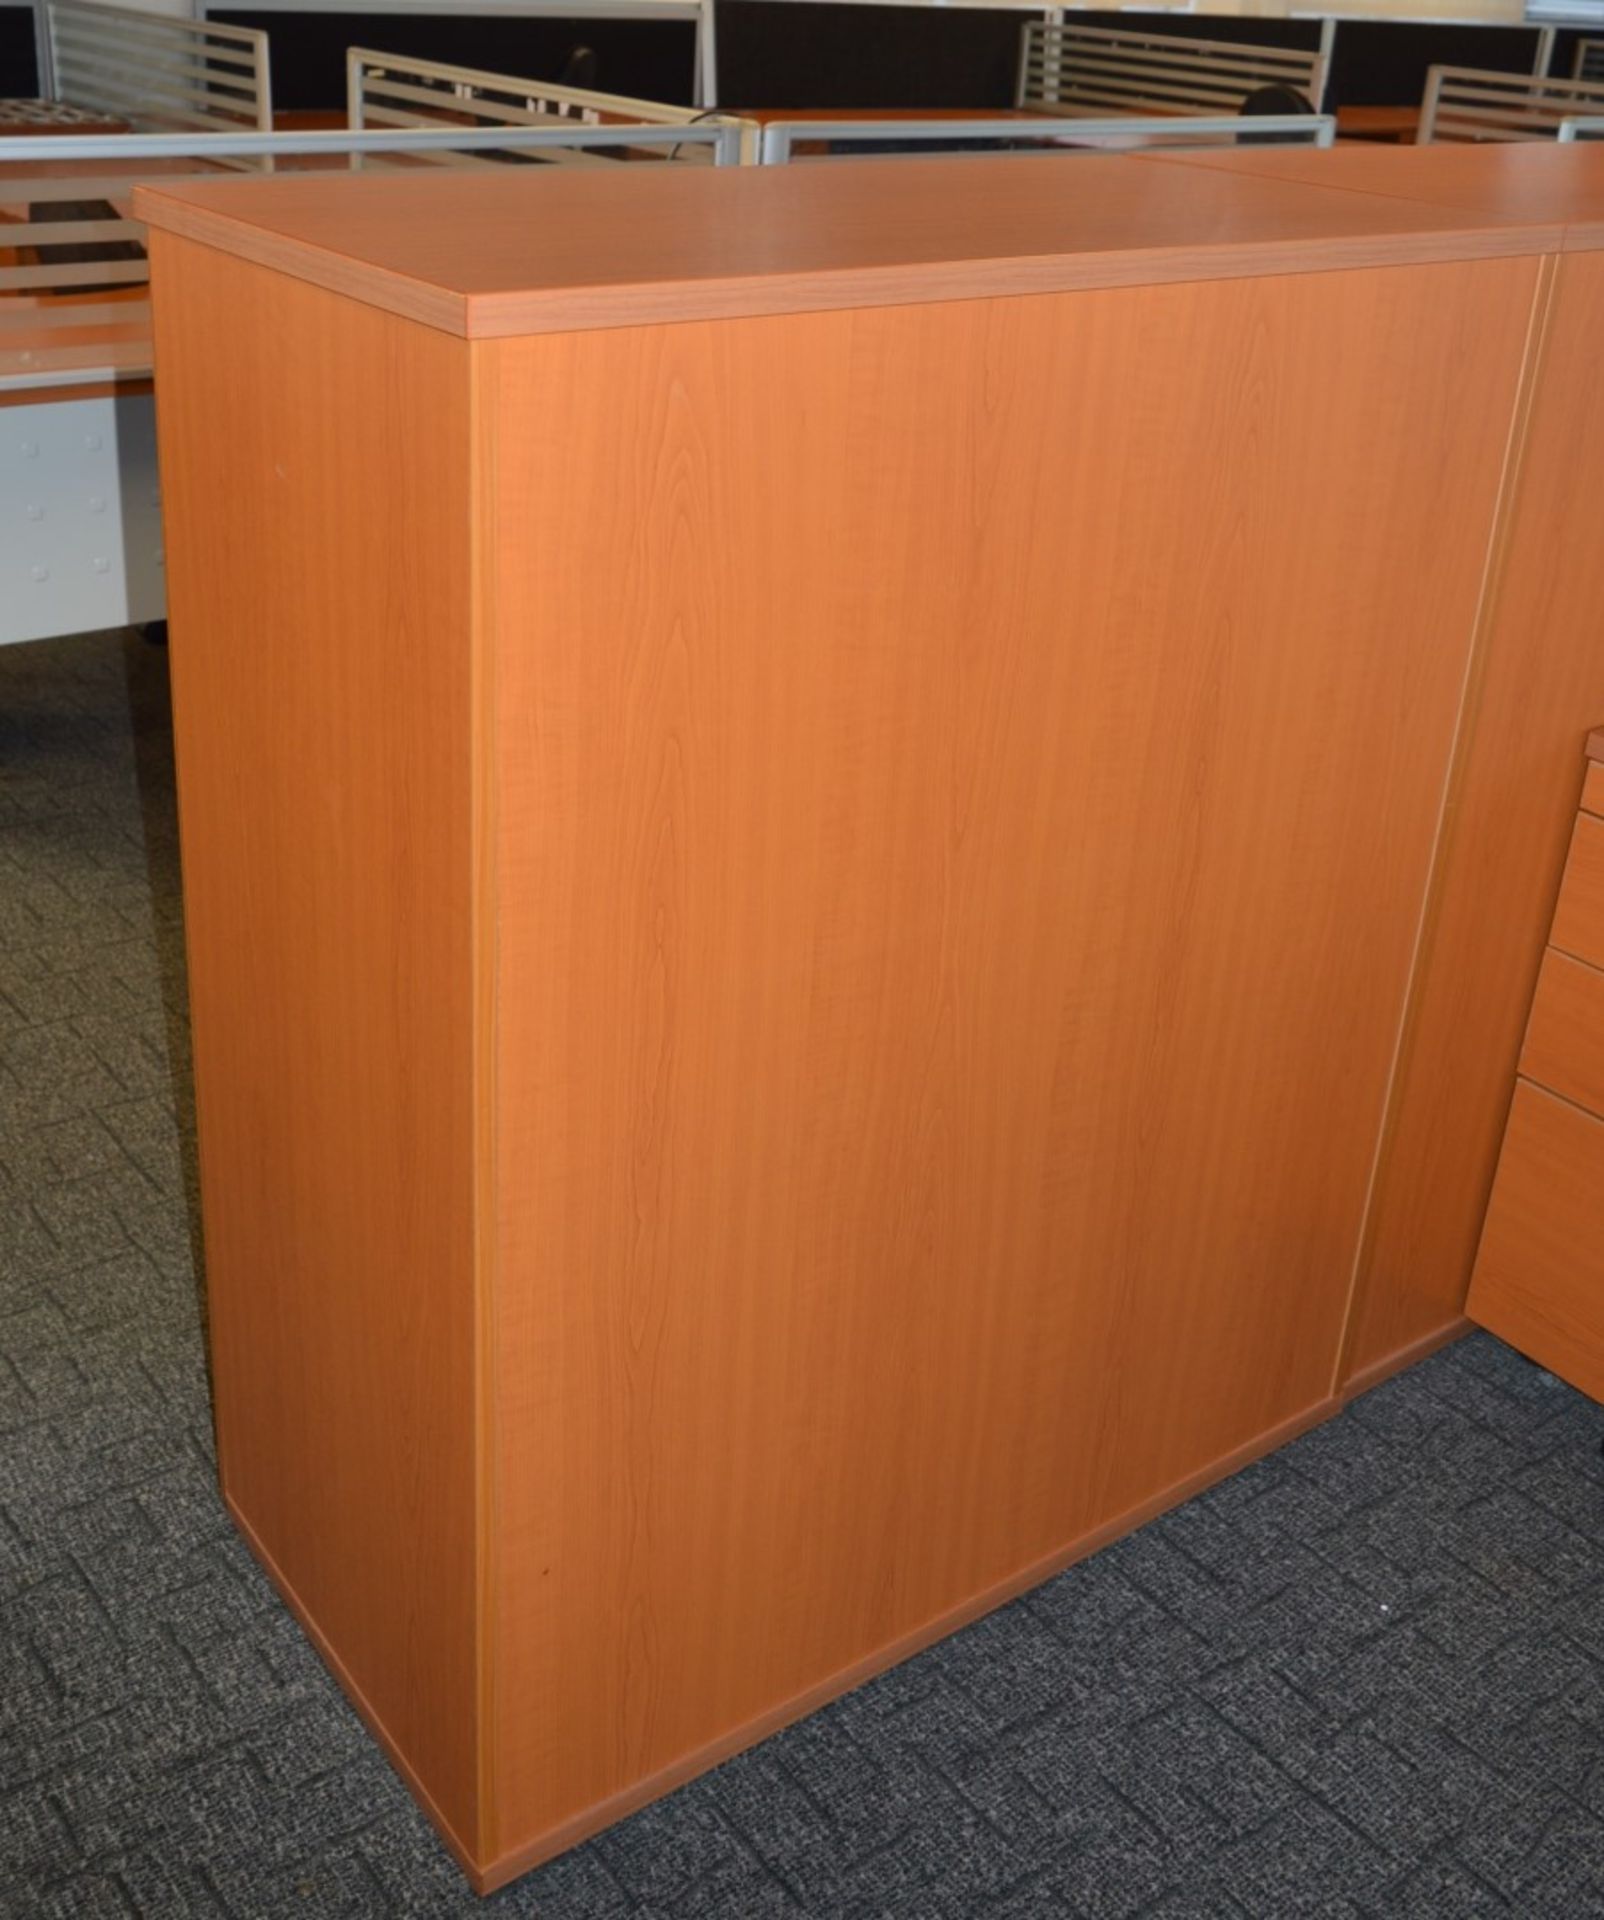 1 x Two Door Office Storage Cabinet With Contemporary Cherry Wood Finish - CL400 - Ref C000 - H120 x - Image 5 of 5